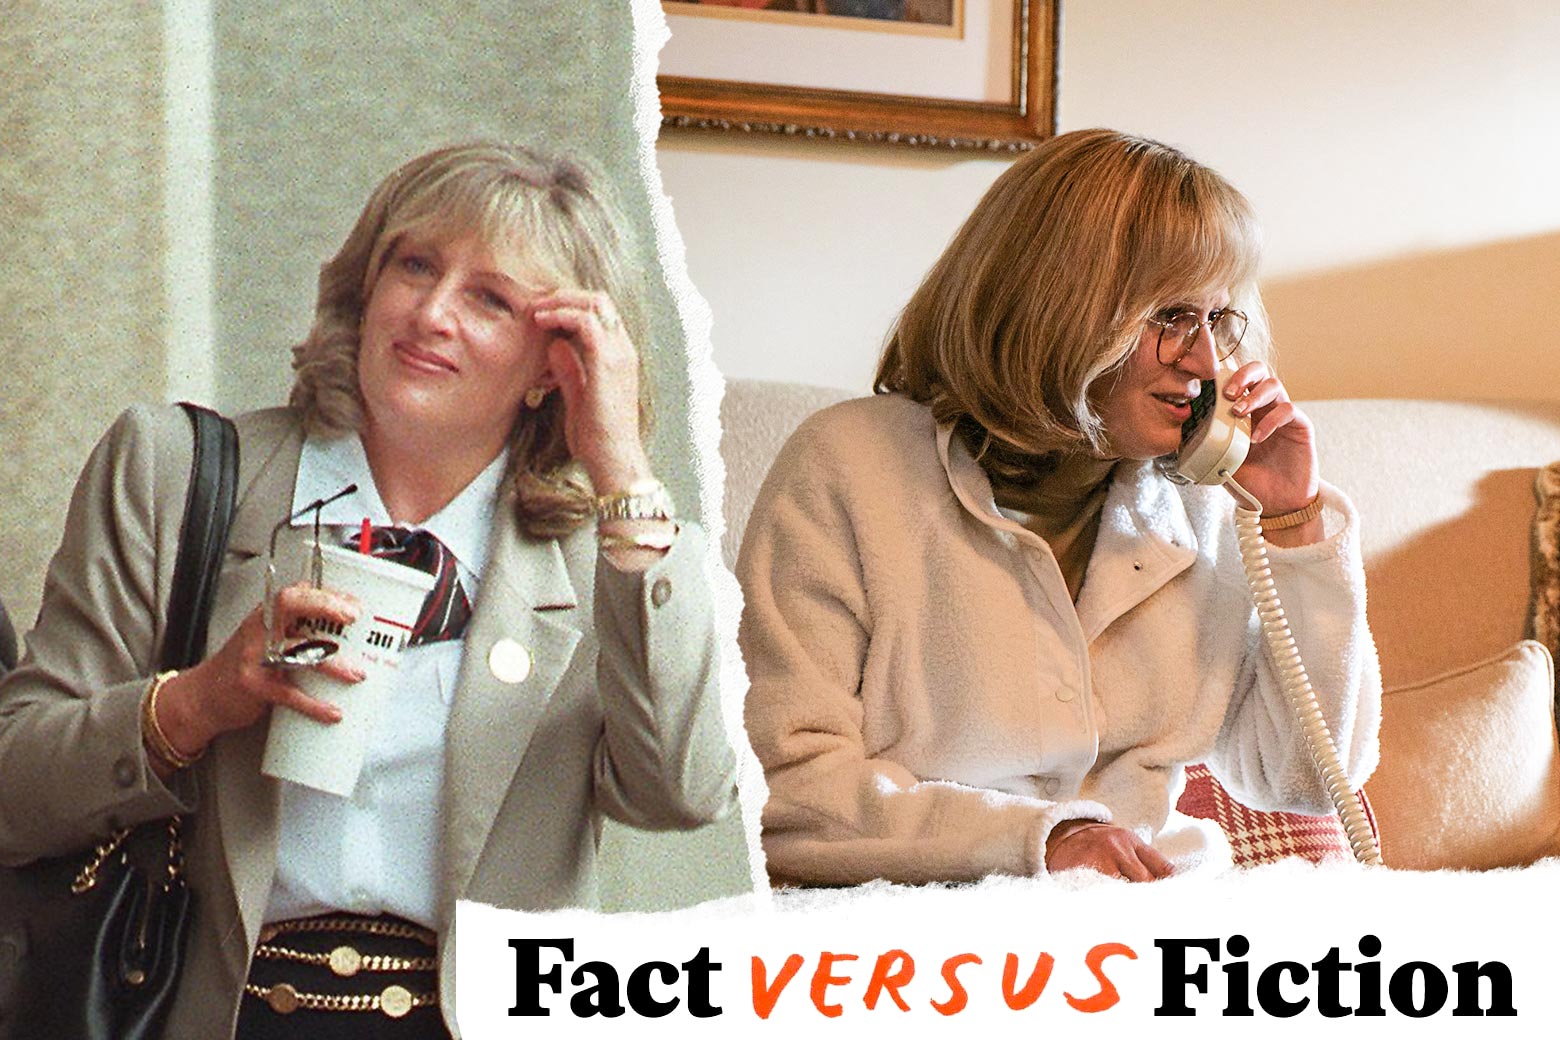 Linda Tripp holding a fast food soda and sunglasses, and Sarah Paulson as Tripp, talking on the phone.